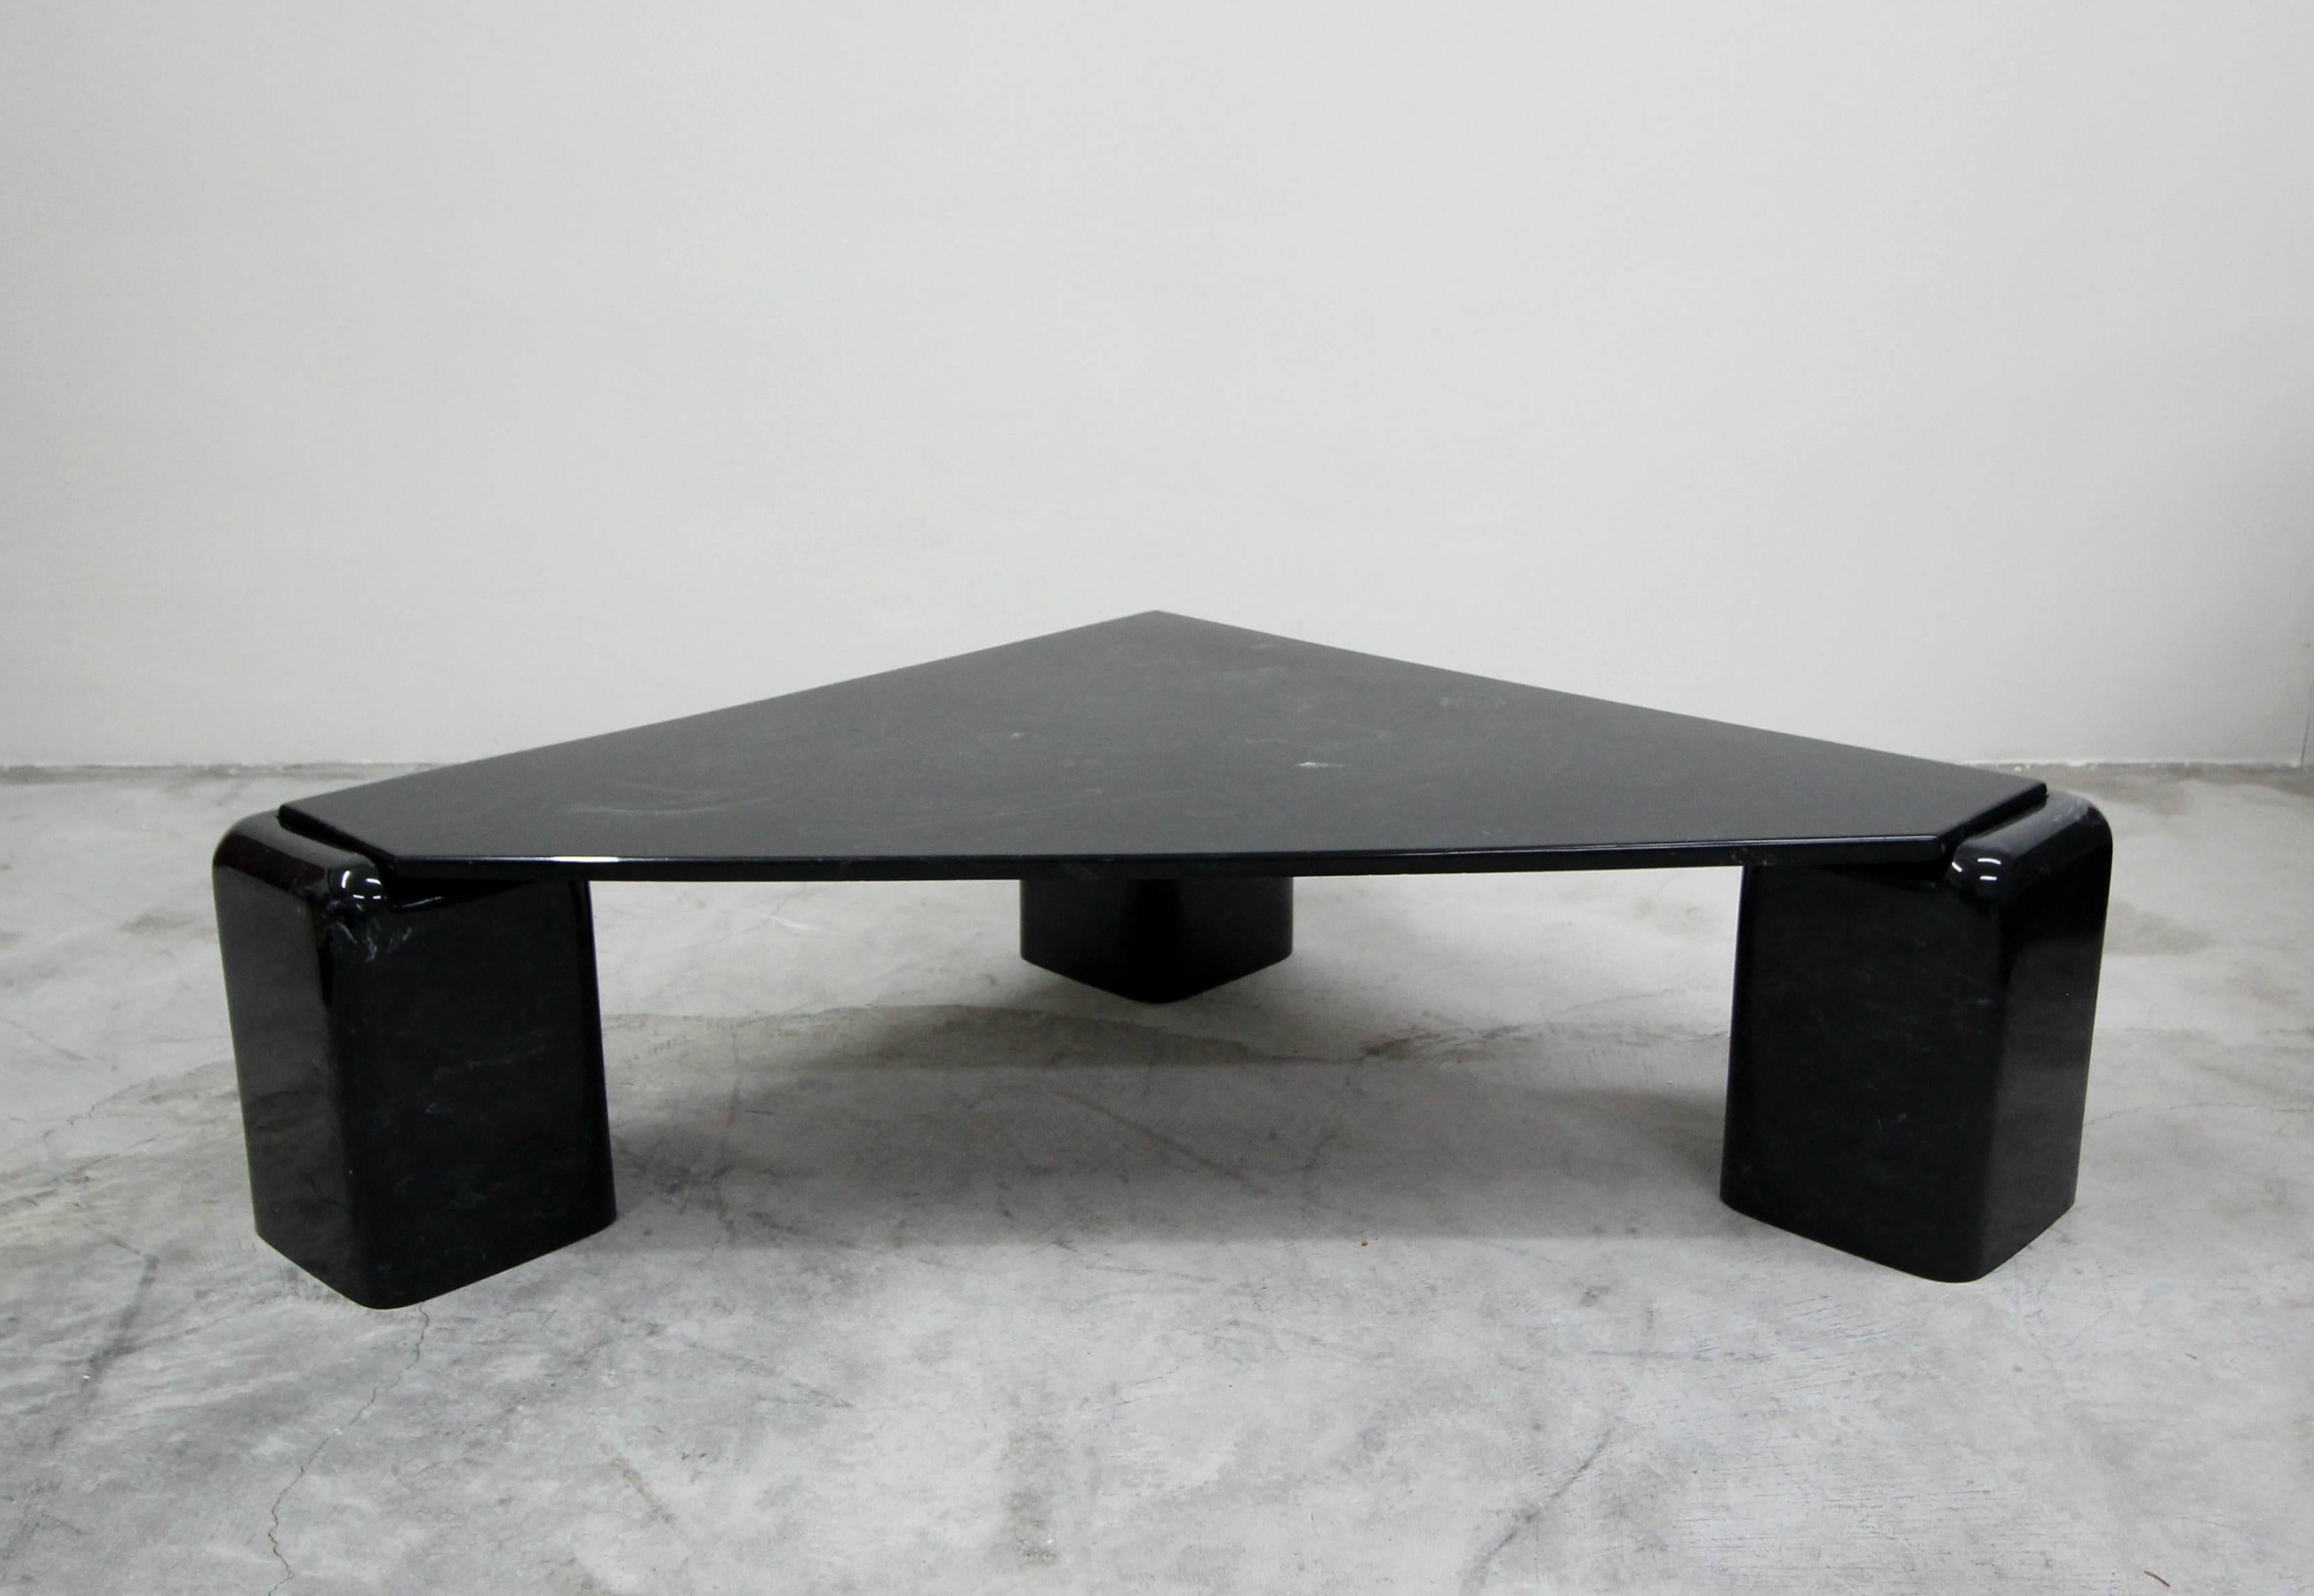 Super unique, three-leg, triangular shaped, black Italian marble coffee table.

Beautiful black and white marble top and legs. Table top sets perfectly into the cutouts of the rounded legs.

True designer piece.